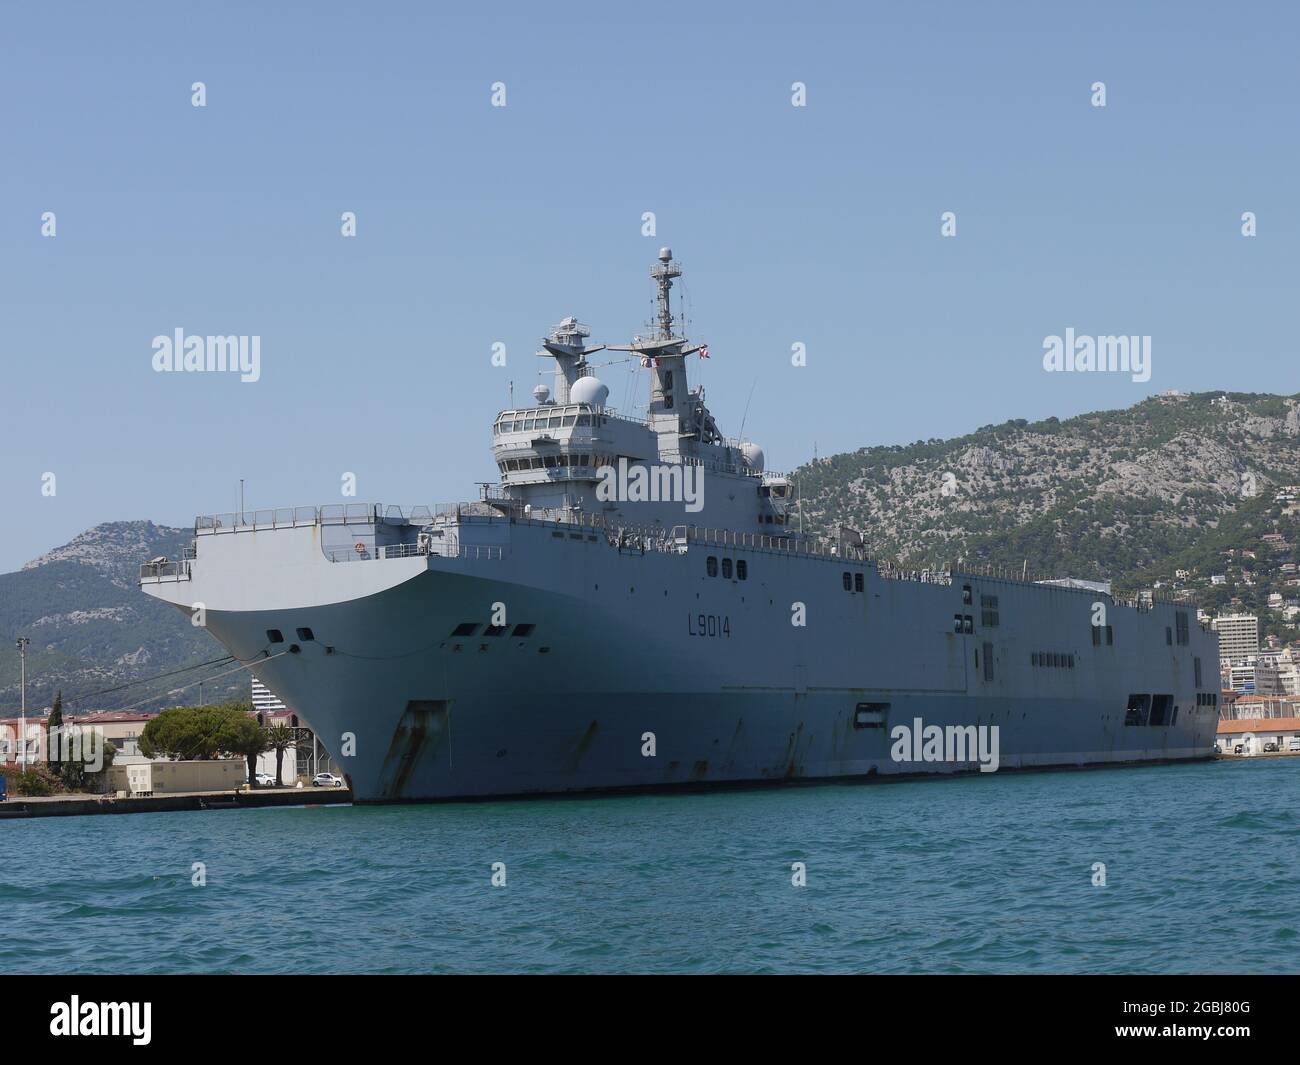 The French helicopter carrier Tonnerre, which is part of the French naval forces, in its home port of Toulon Stock Photo